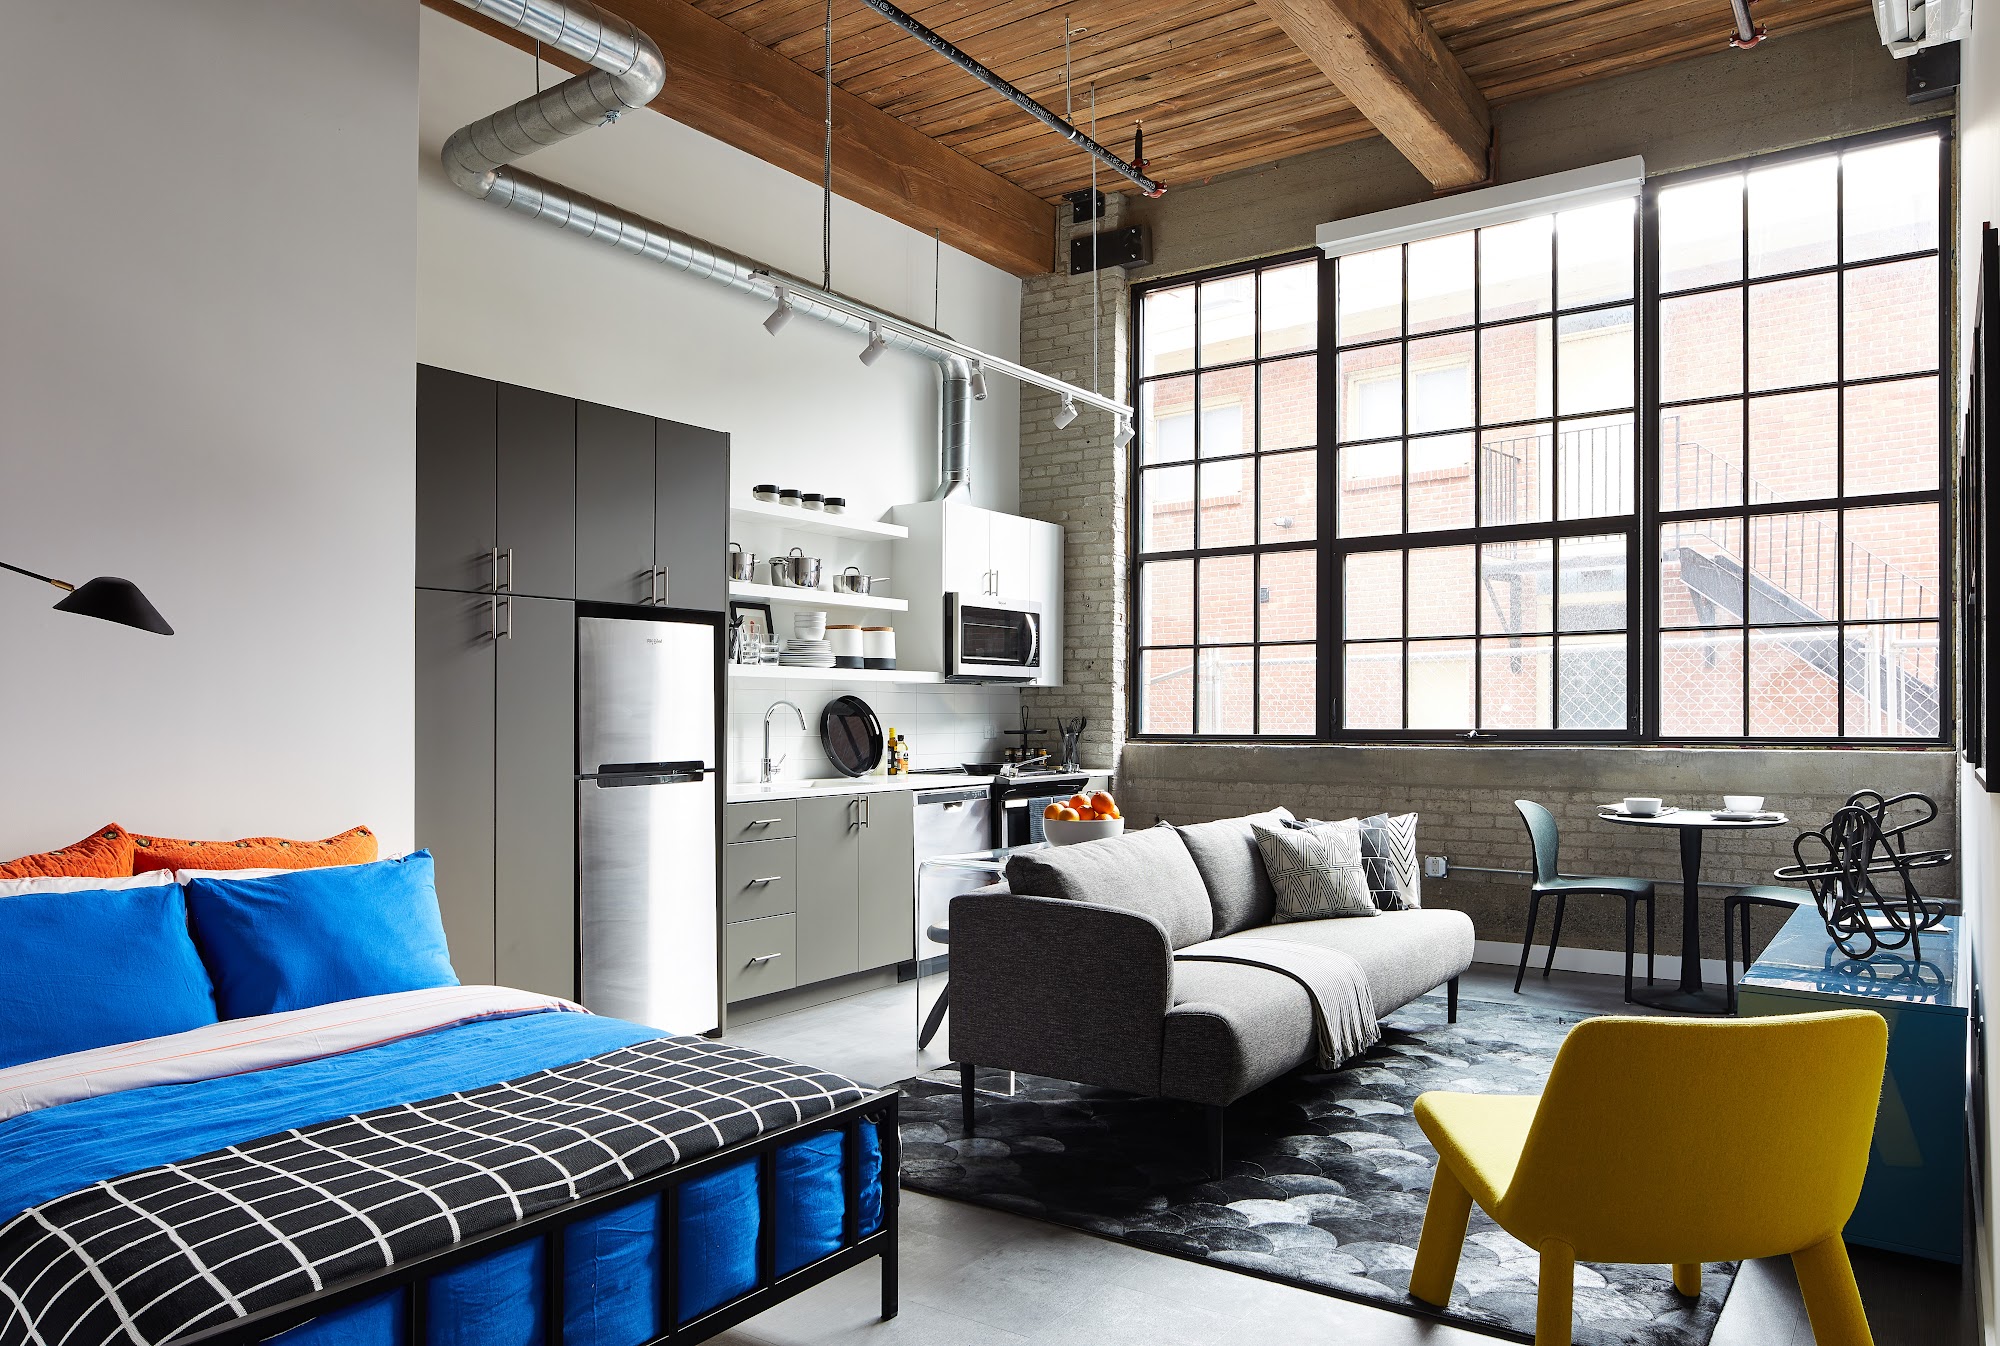 The Graphic Lofts Apartments